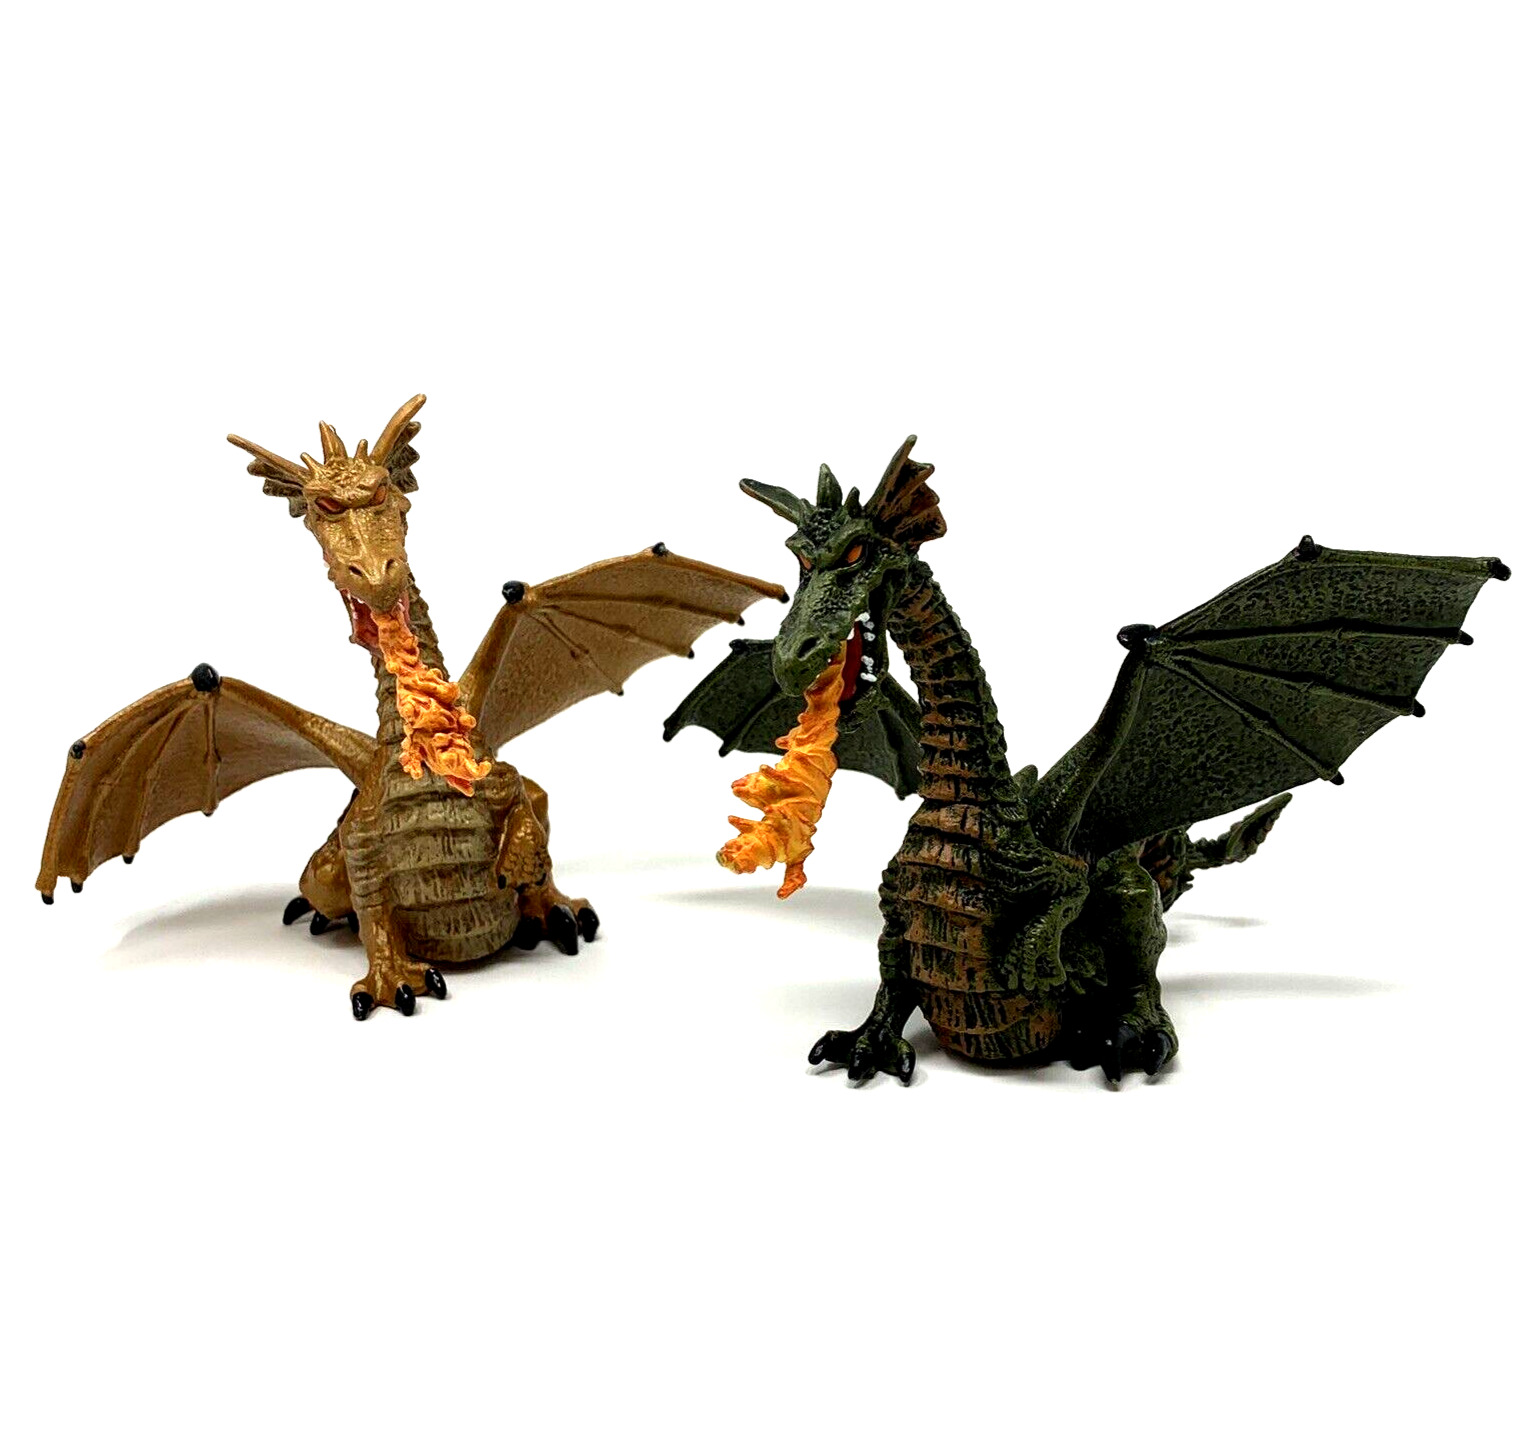 2 / Pair of 2005 Papo Winged Fire-Breathing Dragon PVC Figures 1x Gold 1x Green